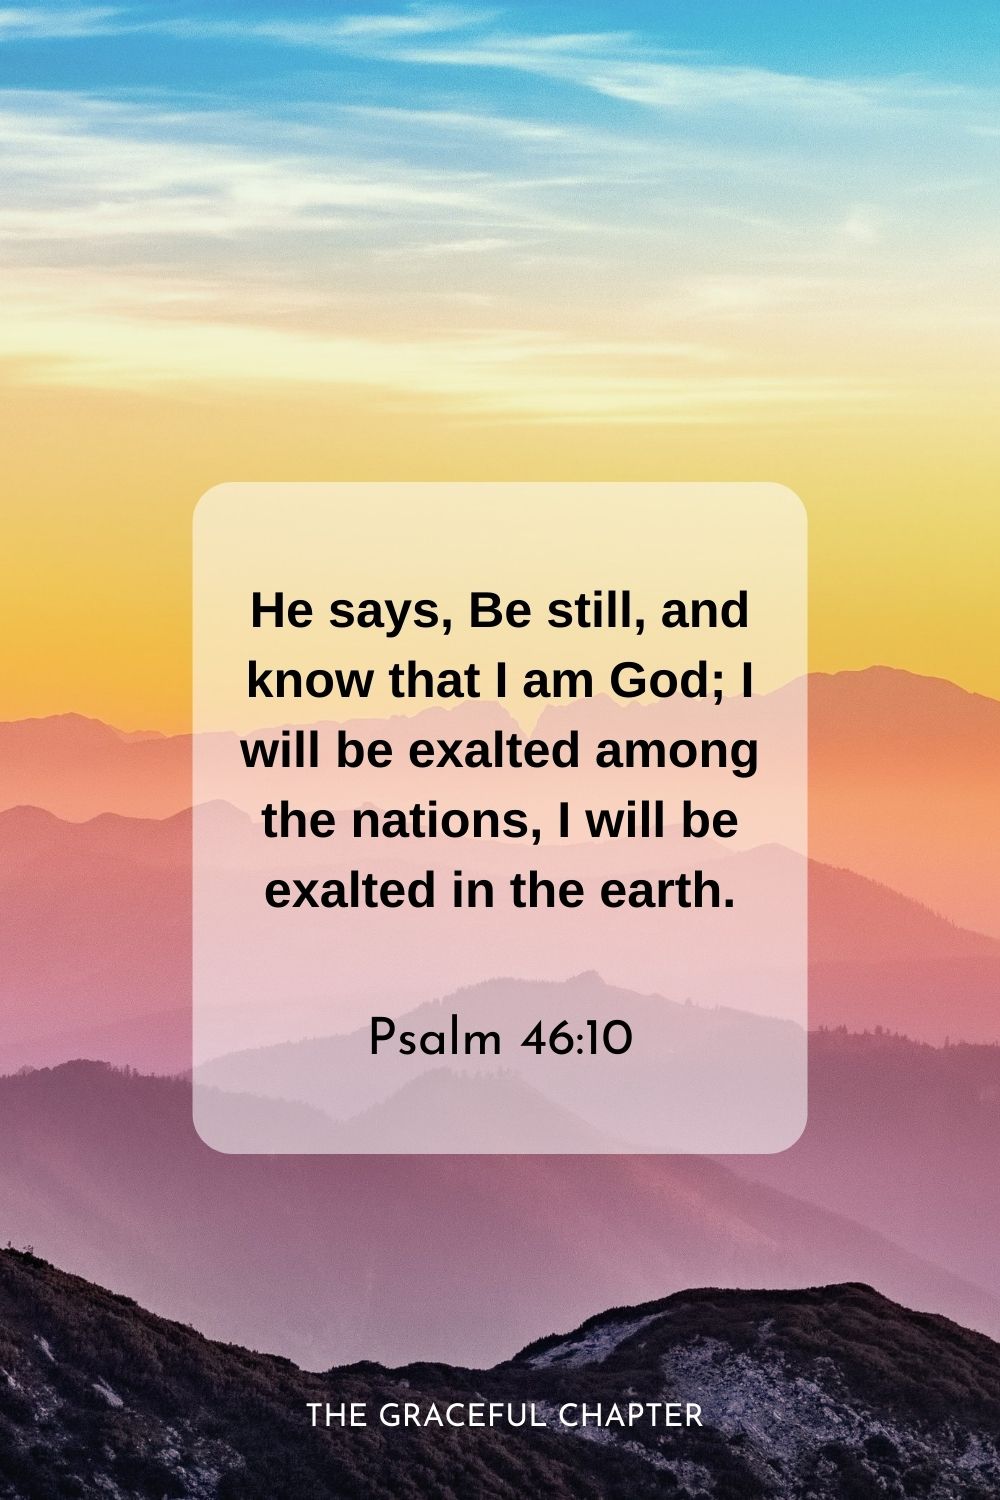 He says, Be still, and know that I am God; I will be exalted among the nations, I will be exalted in the earth.